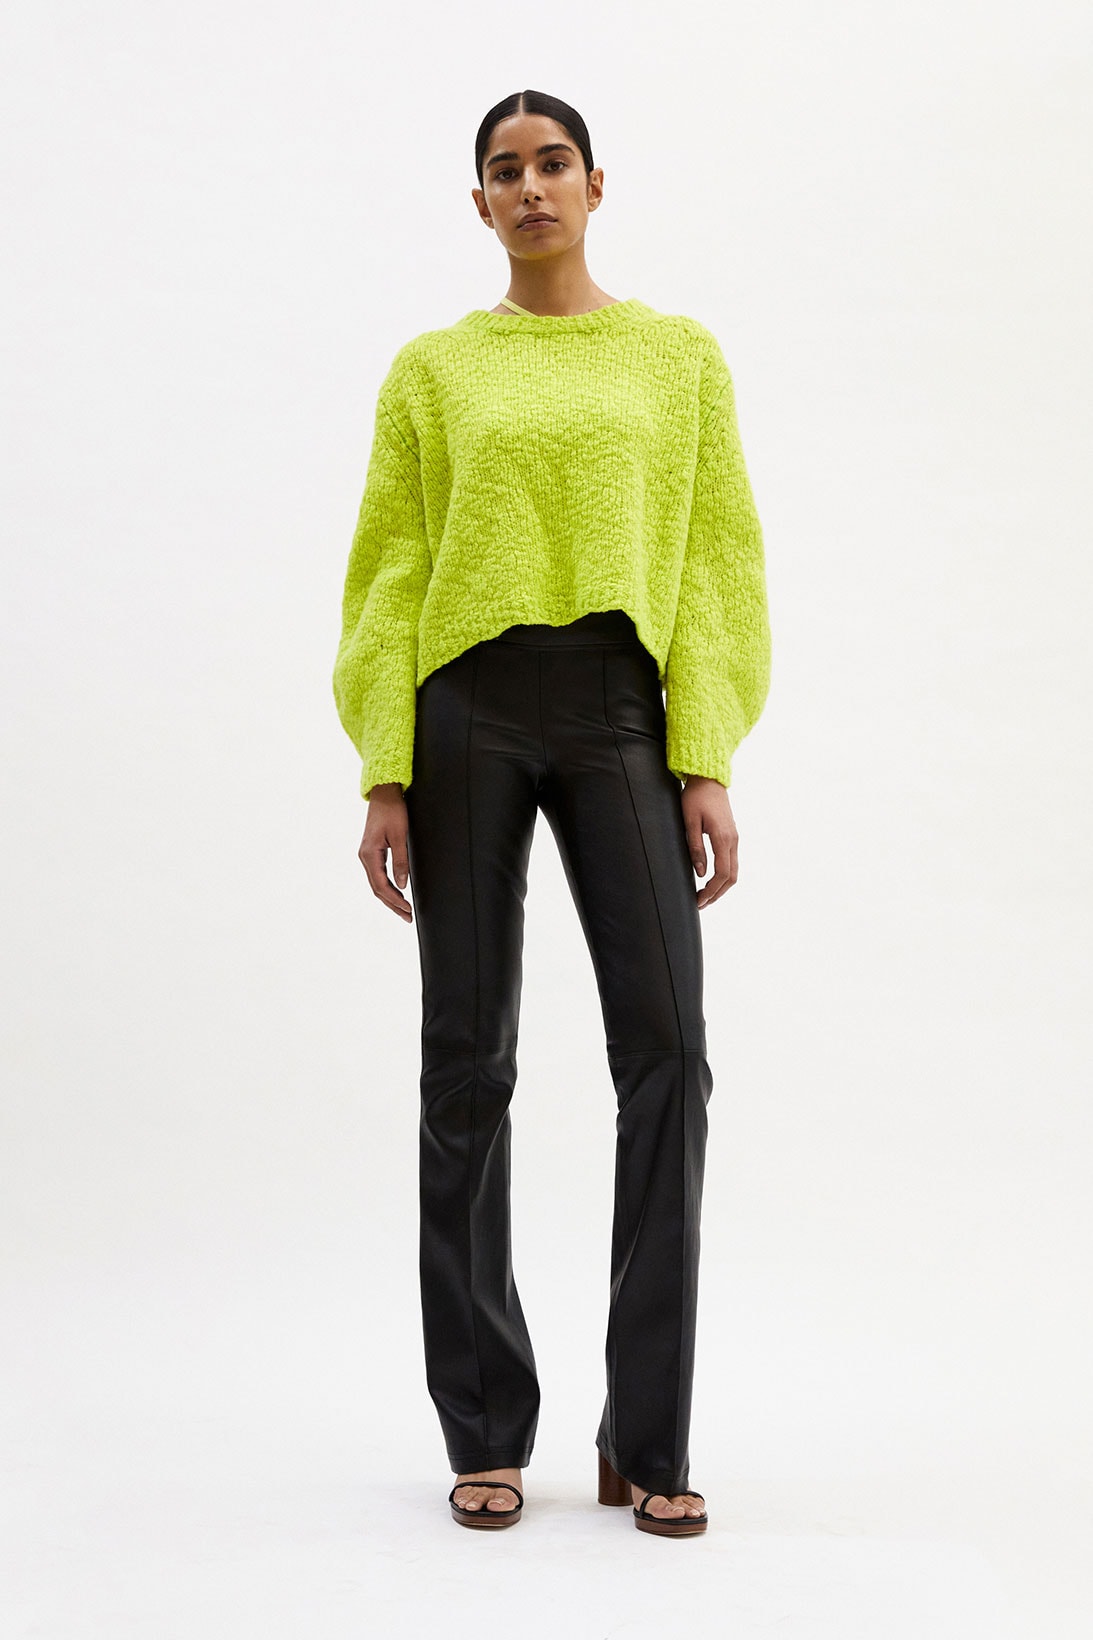 helmut lang fall winter 2021 fw21 collection lookbook knit sweater leather pants